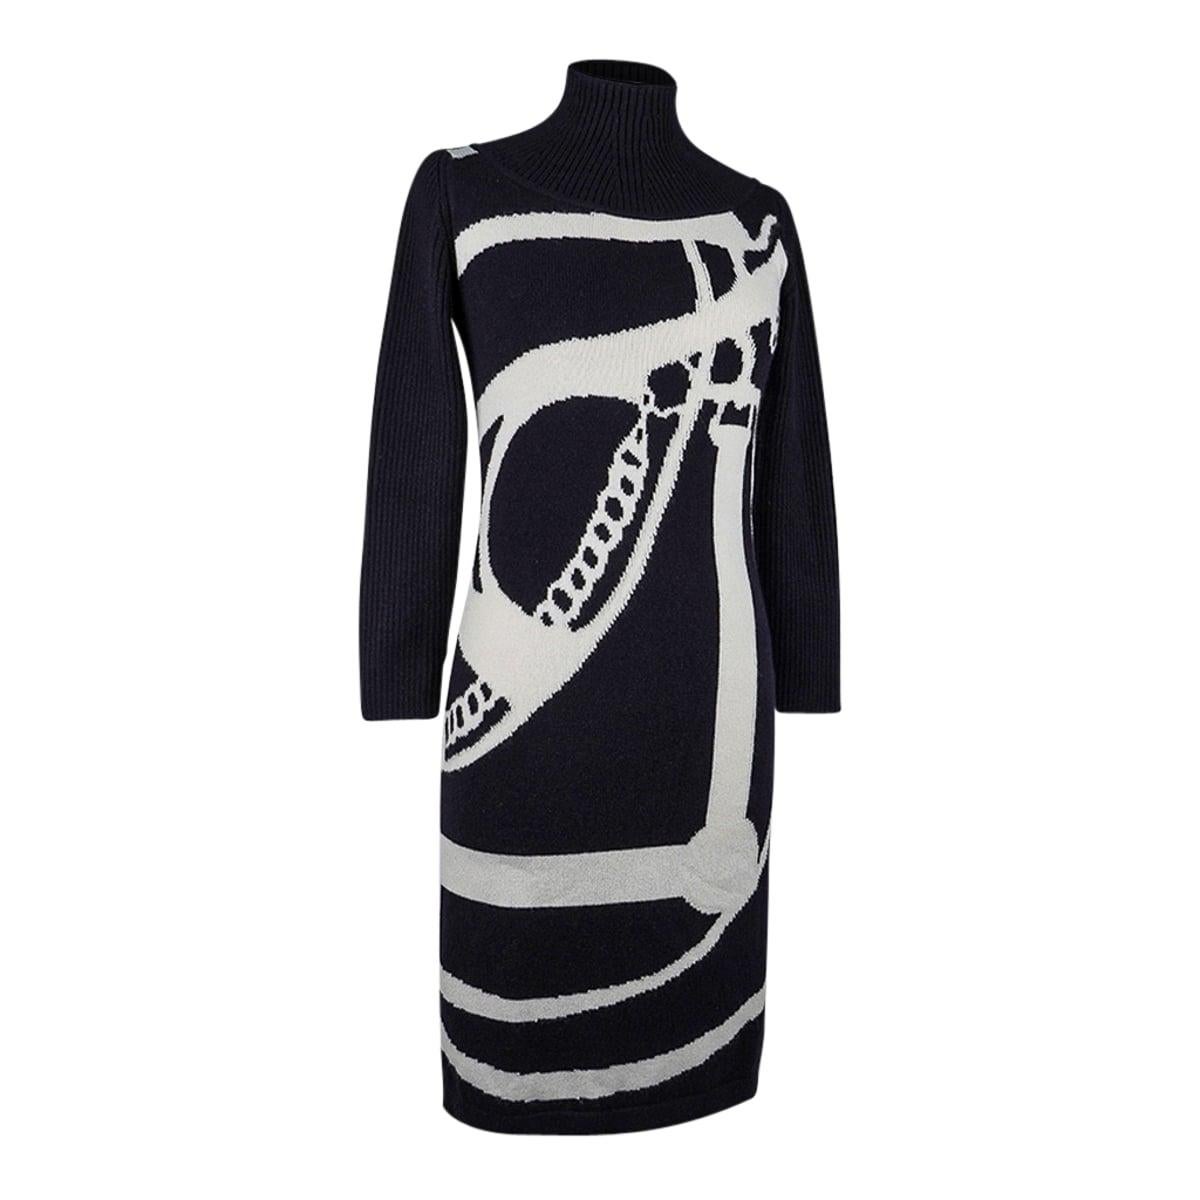 Mightychic offers an Hermes Promenade du Matin Intarsia sweater dress featured in Black and White.
Beautiful in a jacquard cashmere knit with Promenade du Matin intarsia motif.
Black mock turtleneck and black sleeves pullover dress.
Classic abd